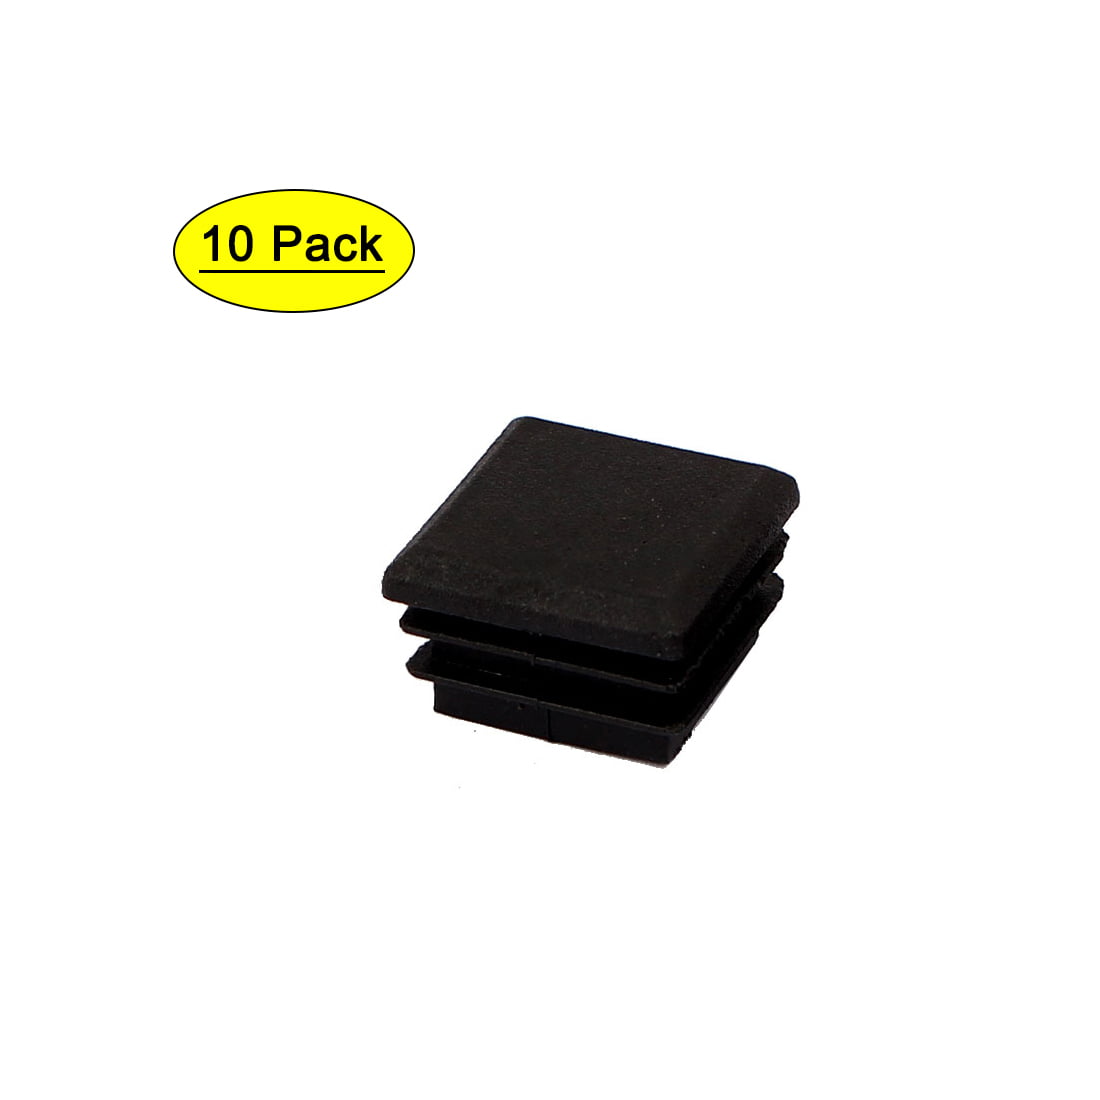 50mm Square Plastic End Caps Inserts BLACK Pack of 10 